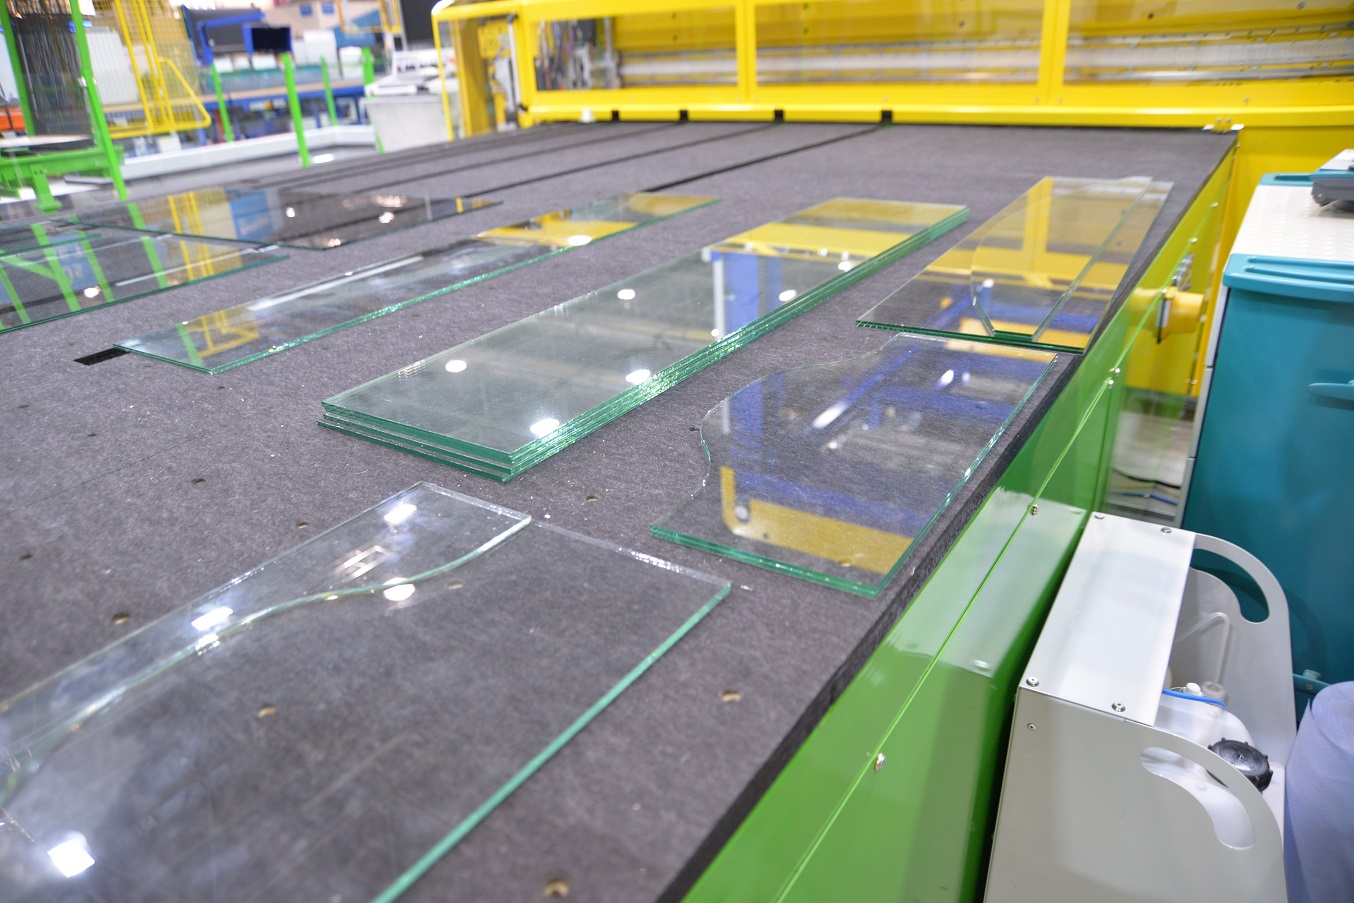 CUTTING OF LAMINATED GLASS - 2-micron single mode fiber laser systems